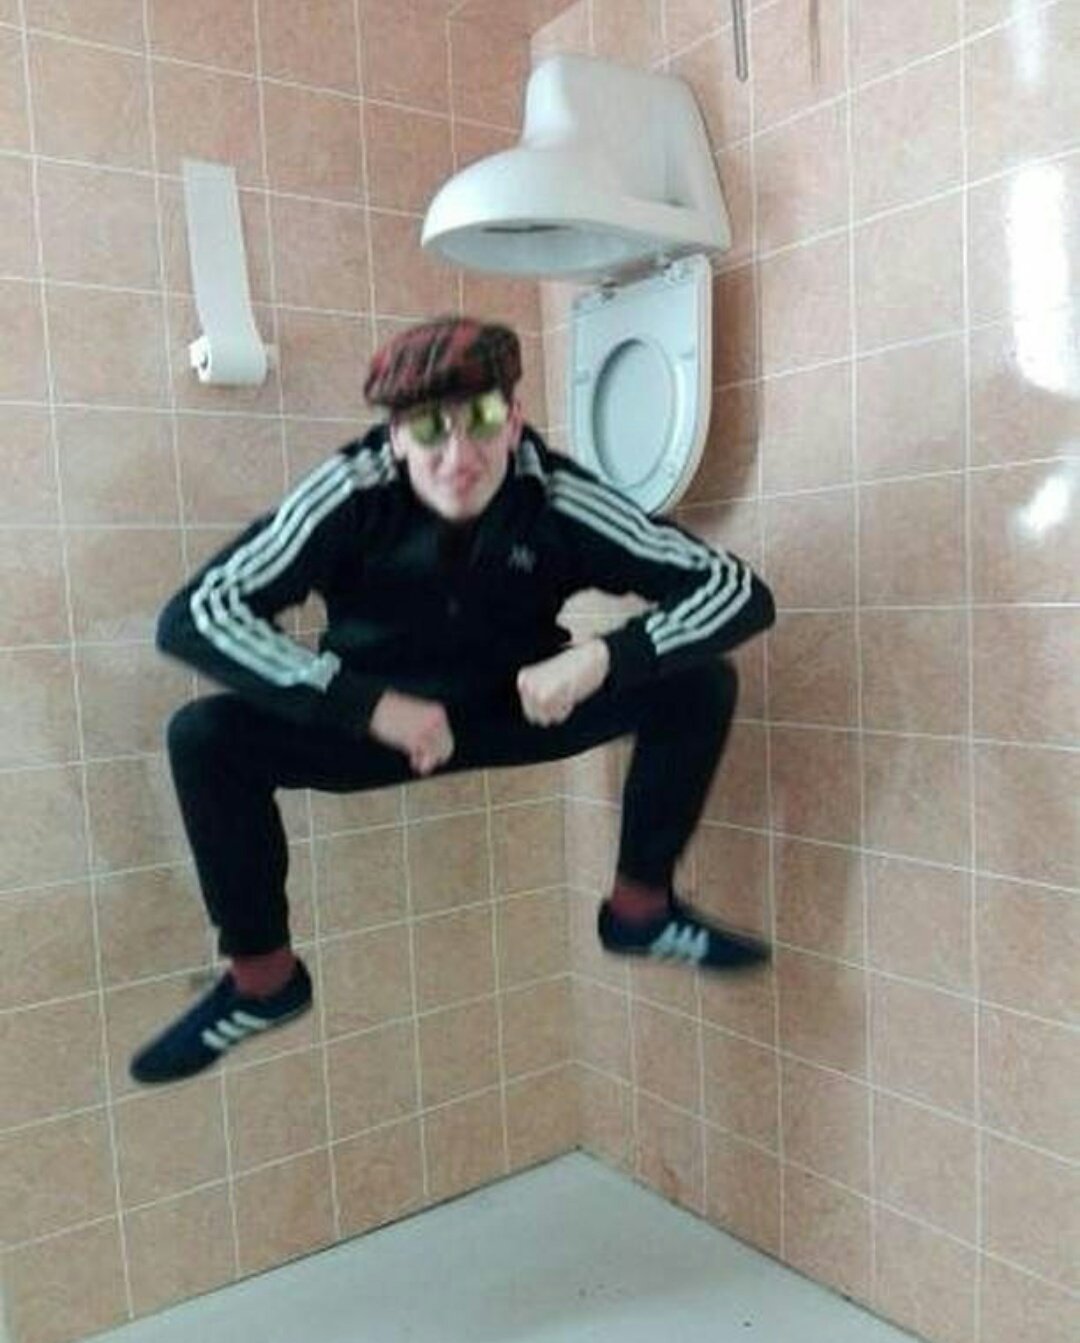 Russian Gopnik on Twitter: "#Russian dynamo?? Is this the next russian sensation? He is true #gopnik squat flying like an ancient Russian #God in #adidas tracksuit. #Memes #meme #funny #Russia #xD #